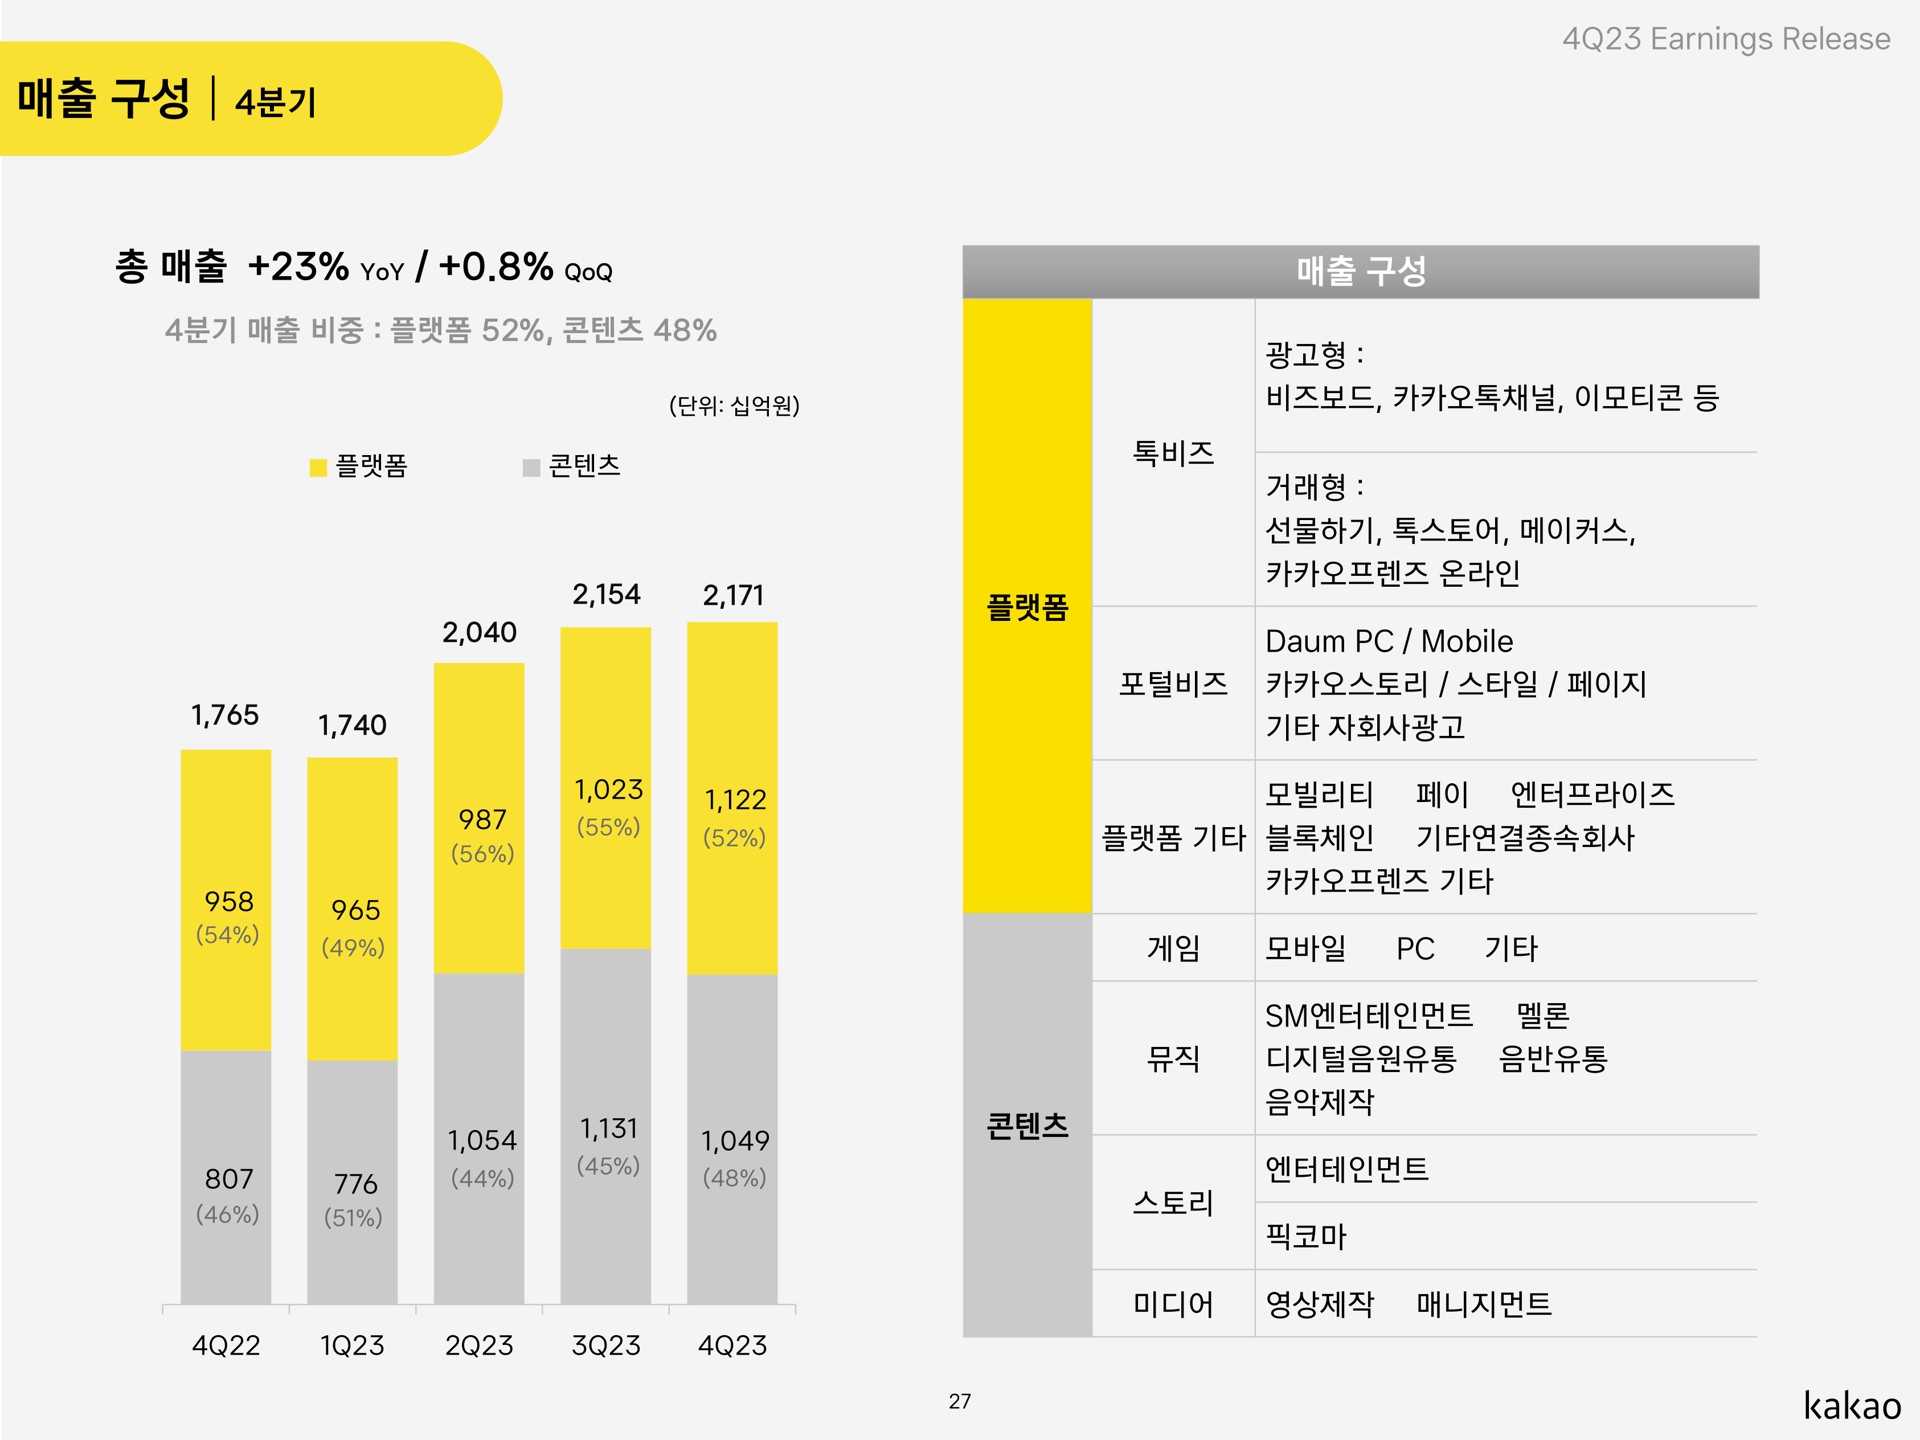 yoy earnings release mobile a sues cheese | Kakao